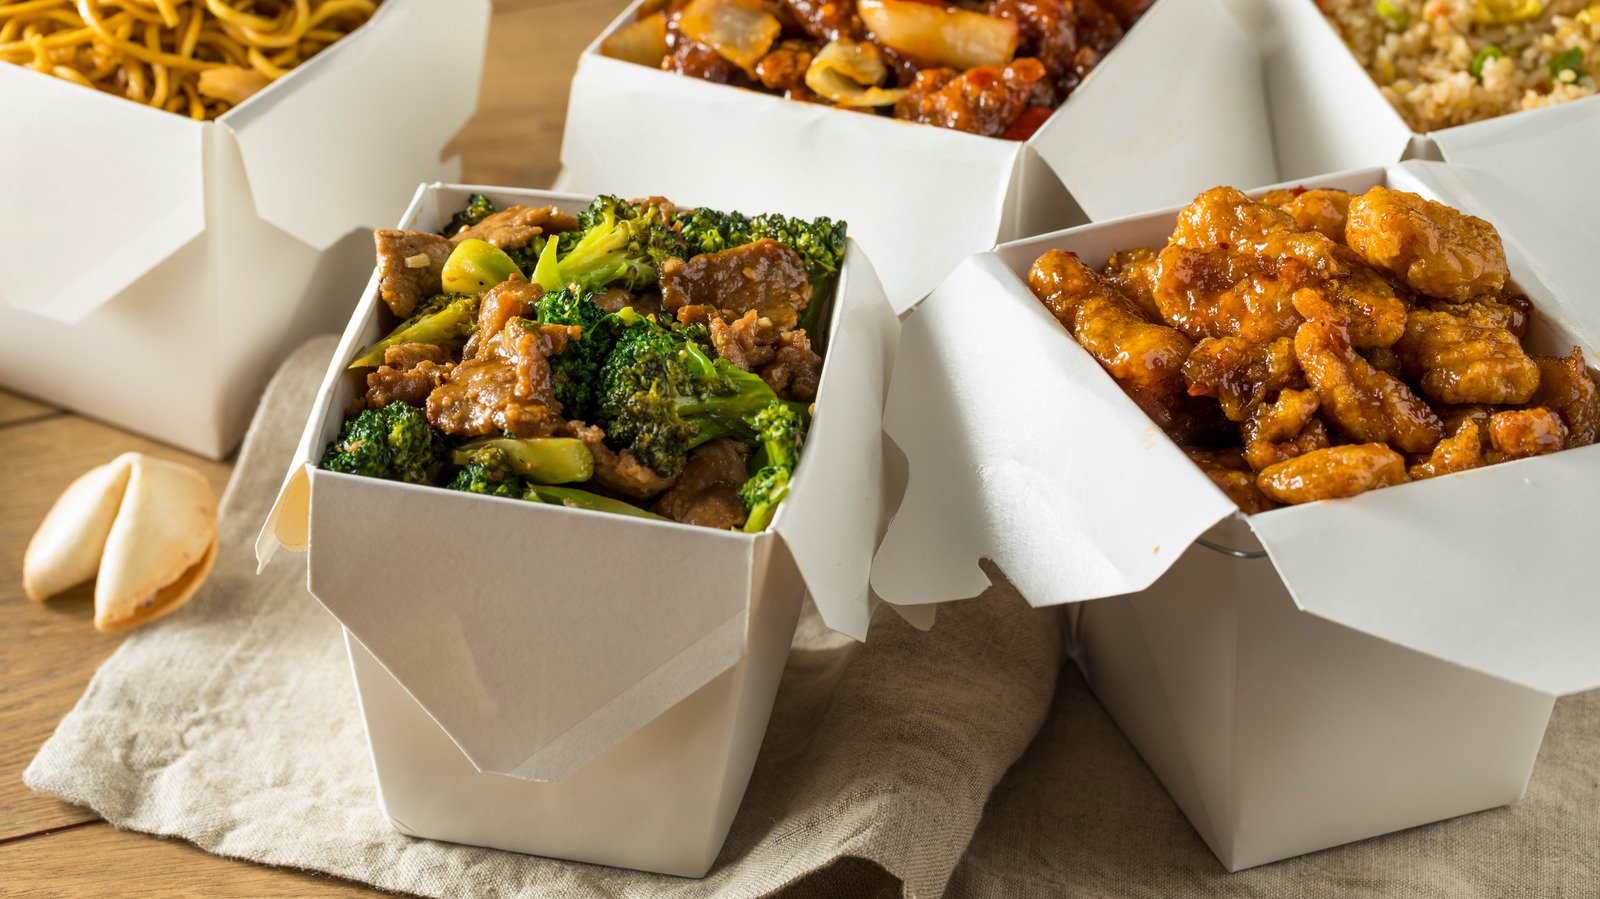 The Real Reason Your Homemade Chinese Food Tastes Different From Takeout